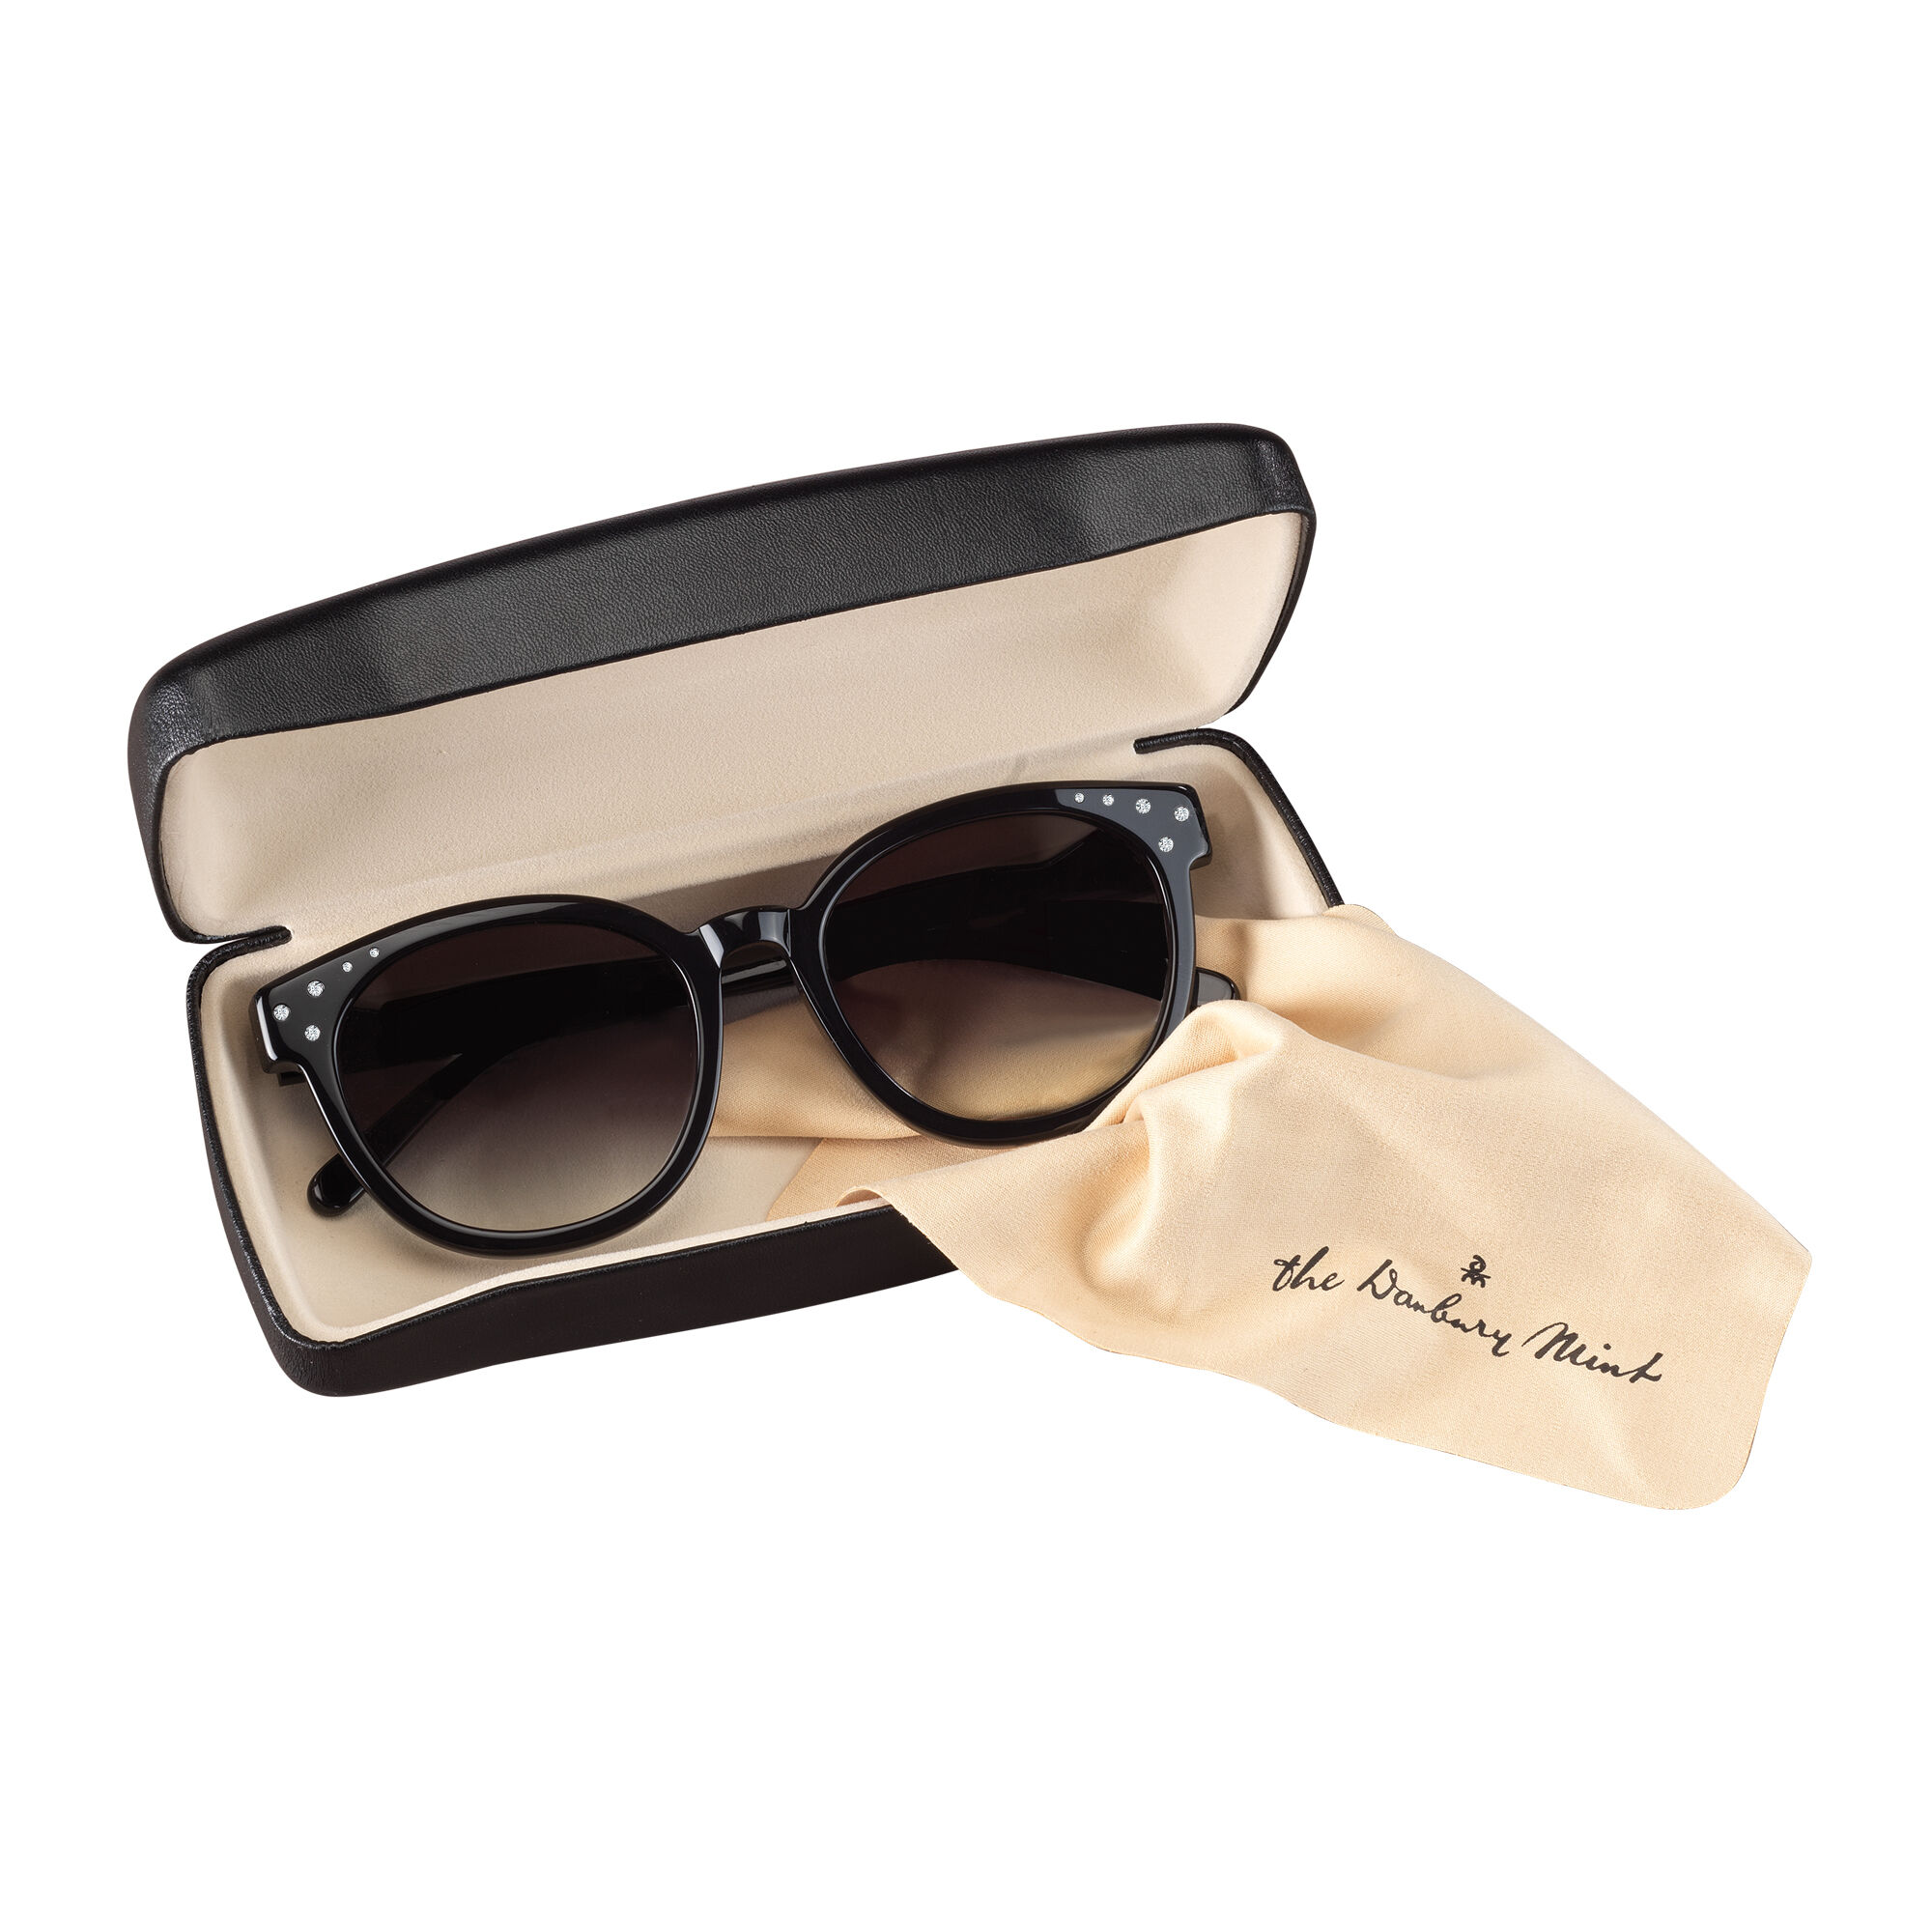 Personalized Glam Sunglasses 11298 0016 d inside